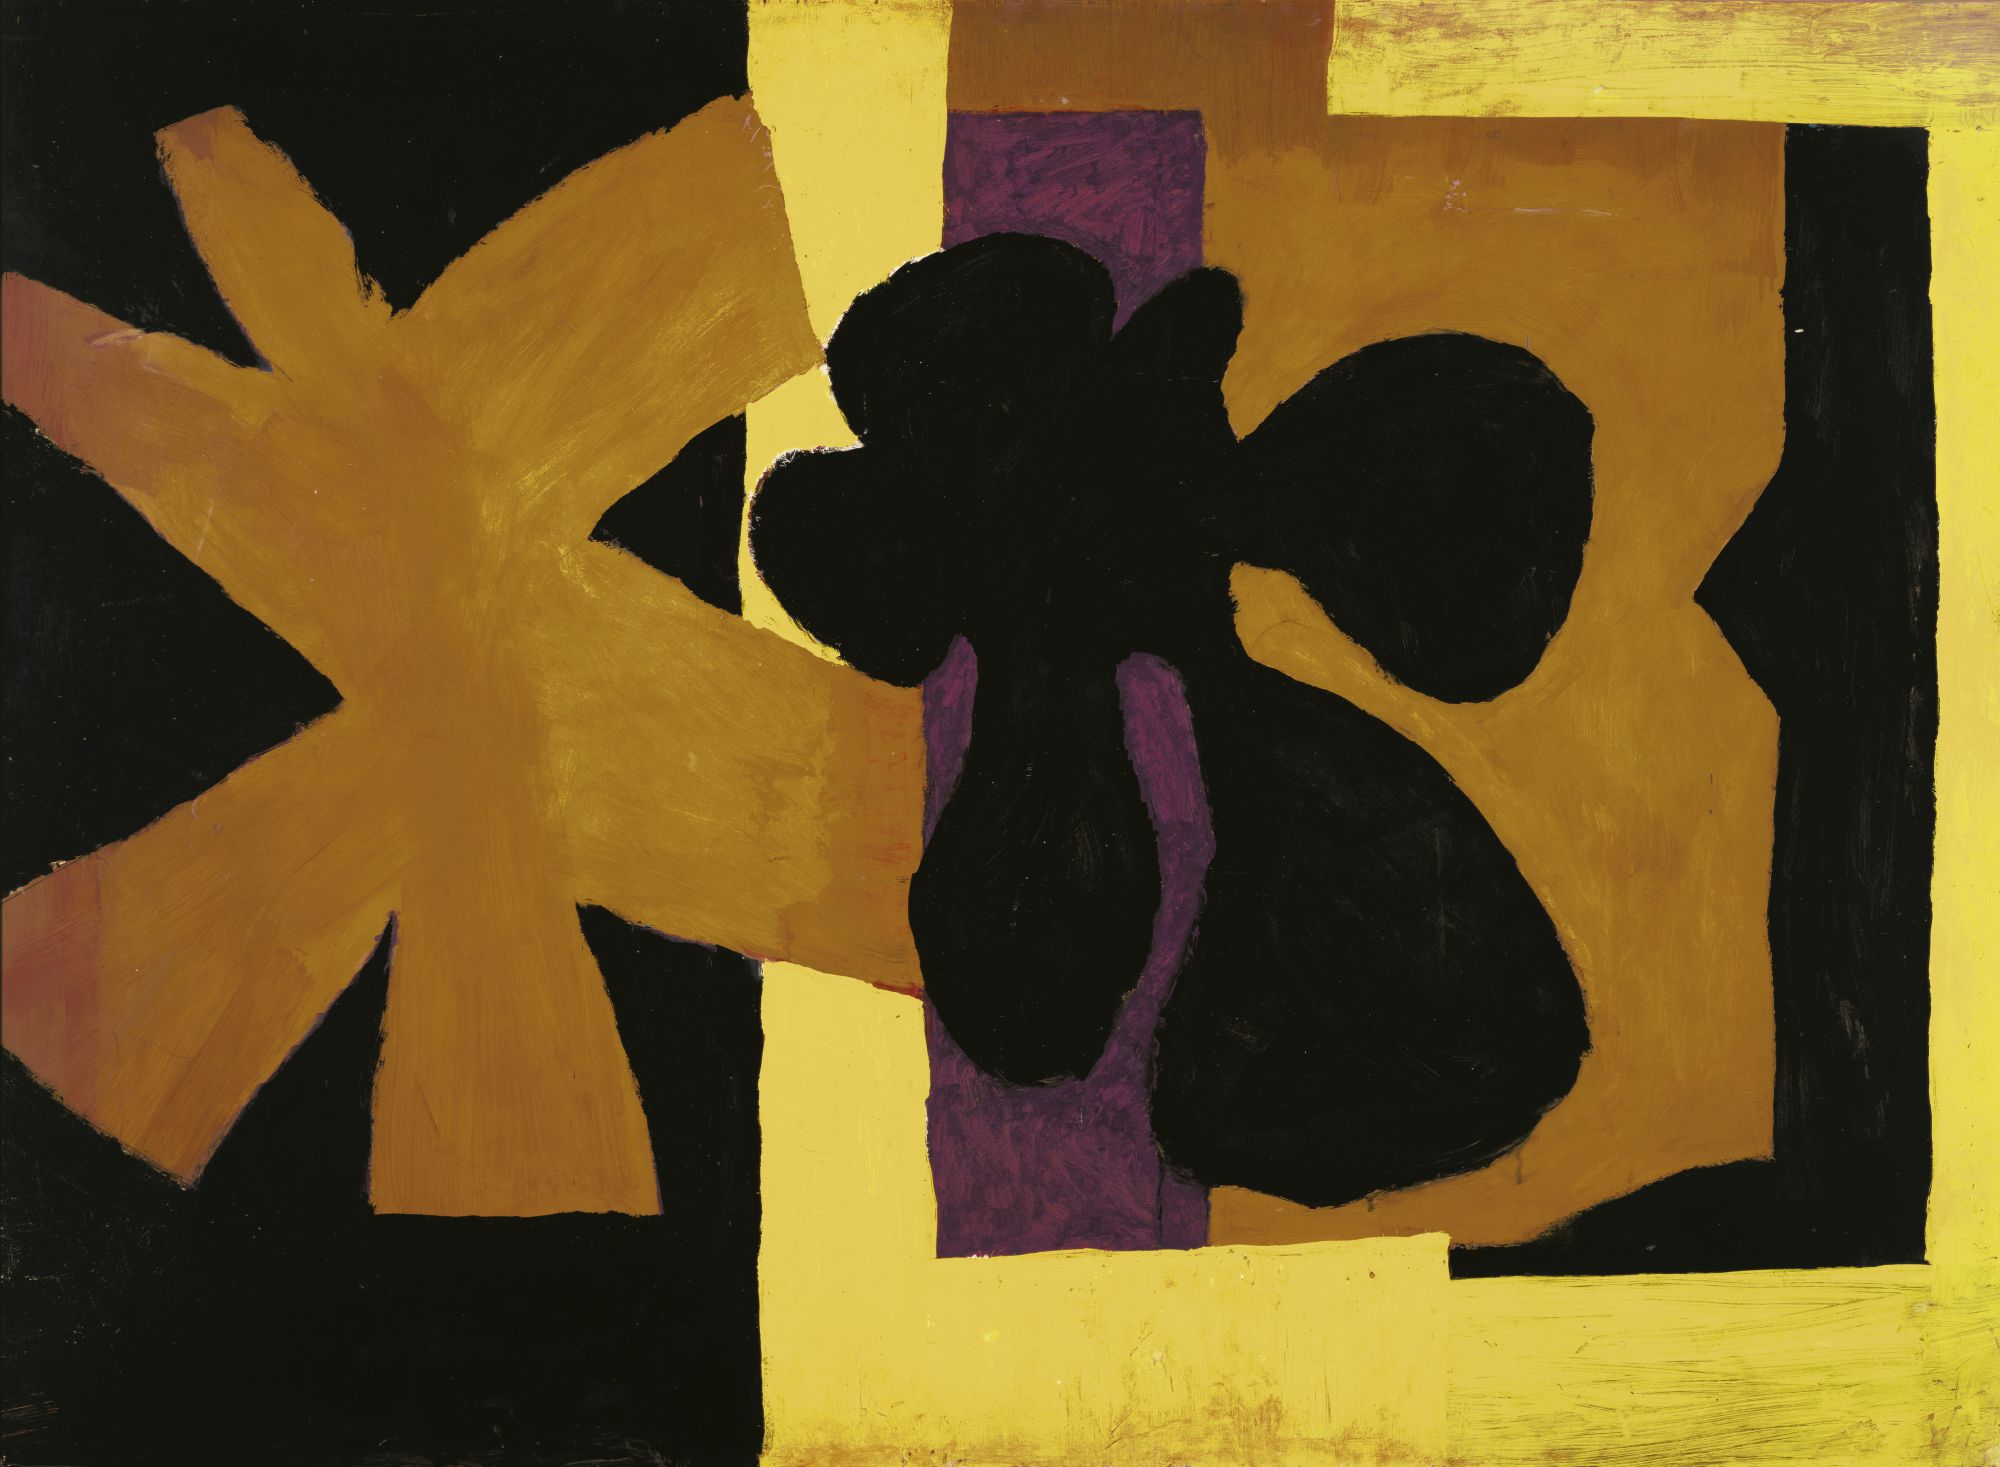 Wall Painting, 1951, oil on Homasote, 44 ✕ 58 in. (111.8 ✕ 147.3 cm)